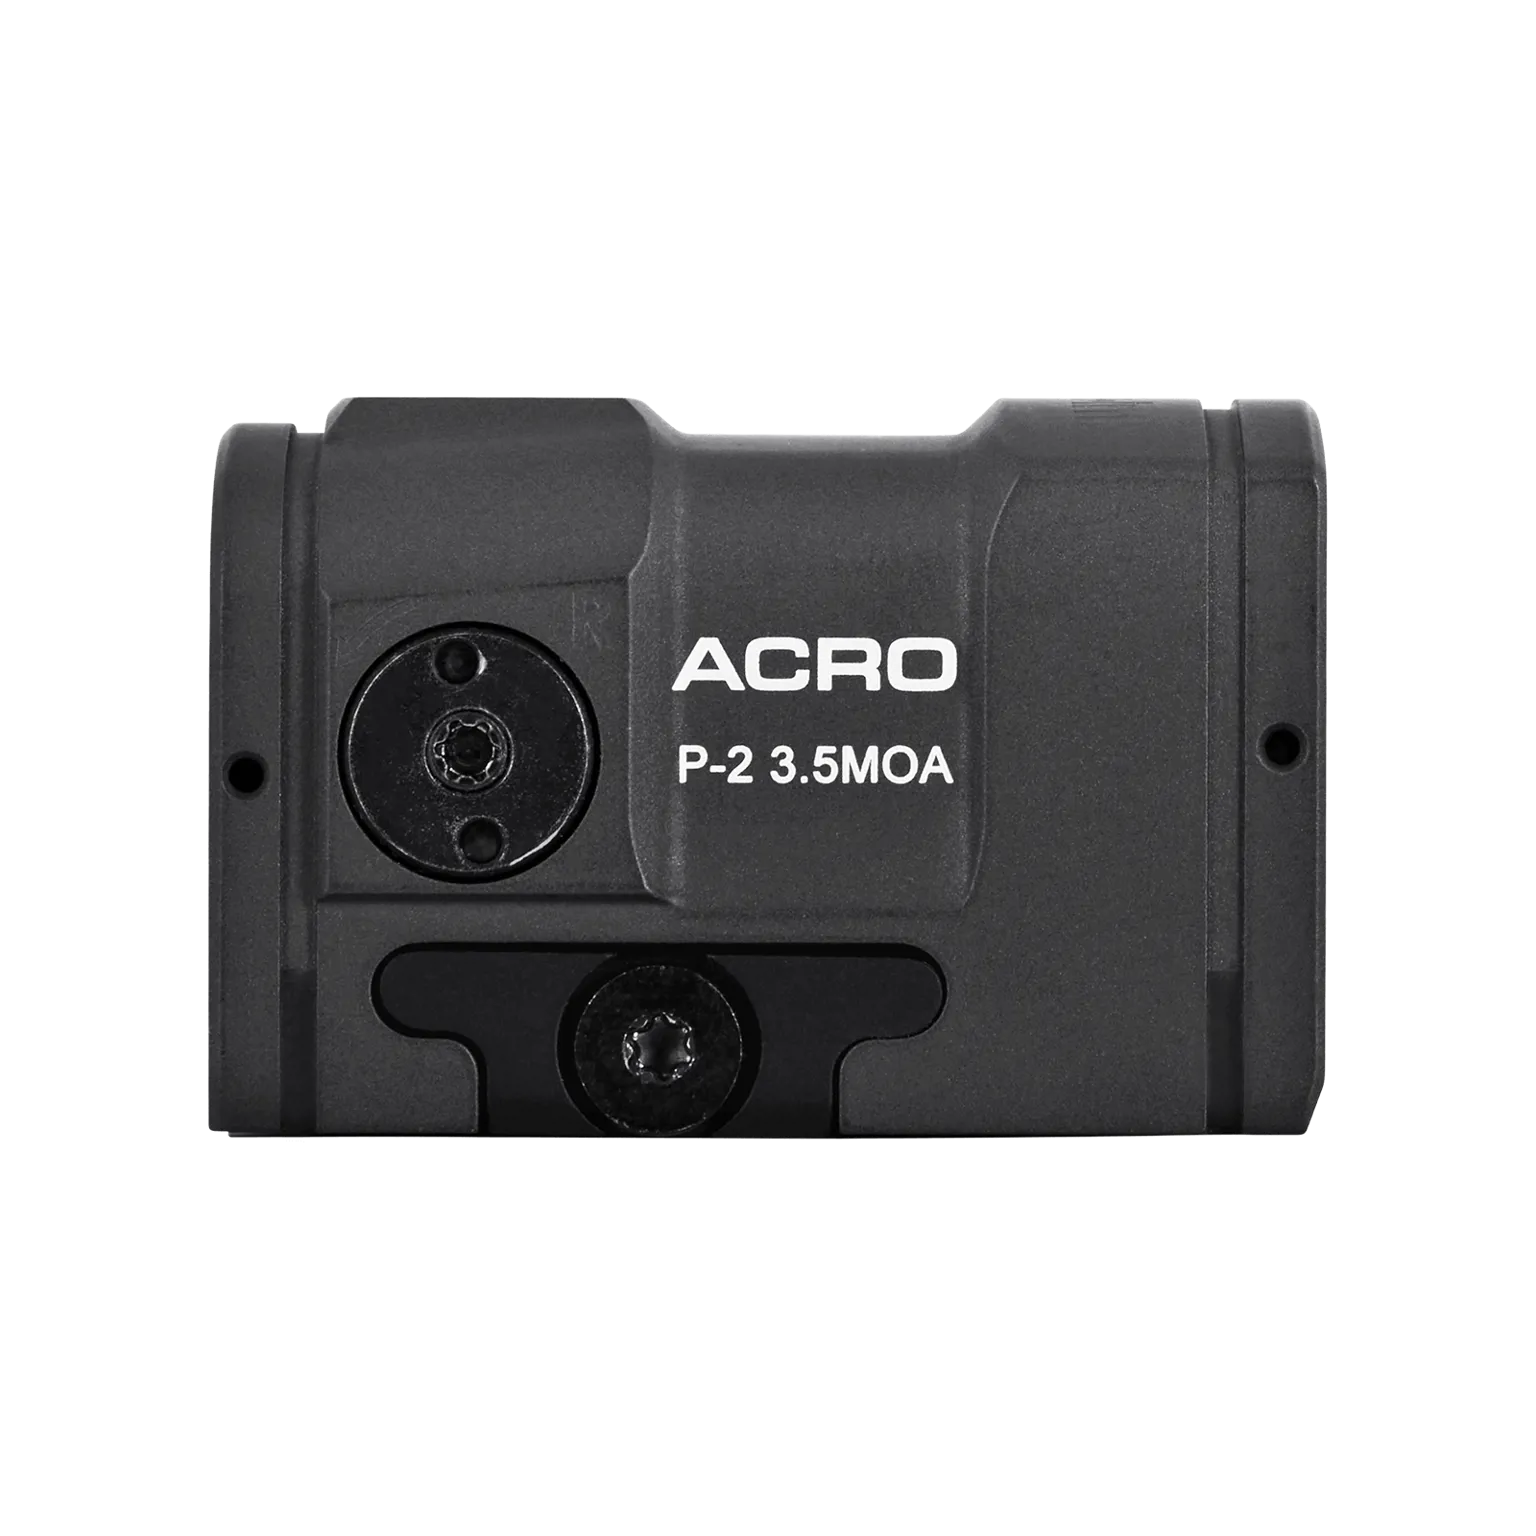 Acro P-2™ Sniper Grey 3.5 MOA - Red dot reflex sight with integrated Acro™ interface - 2